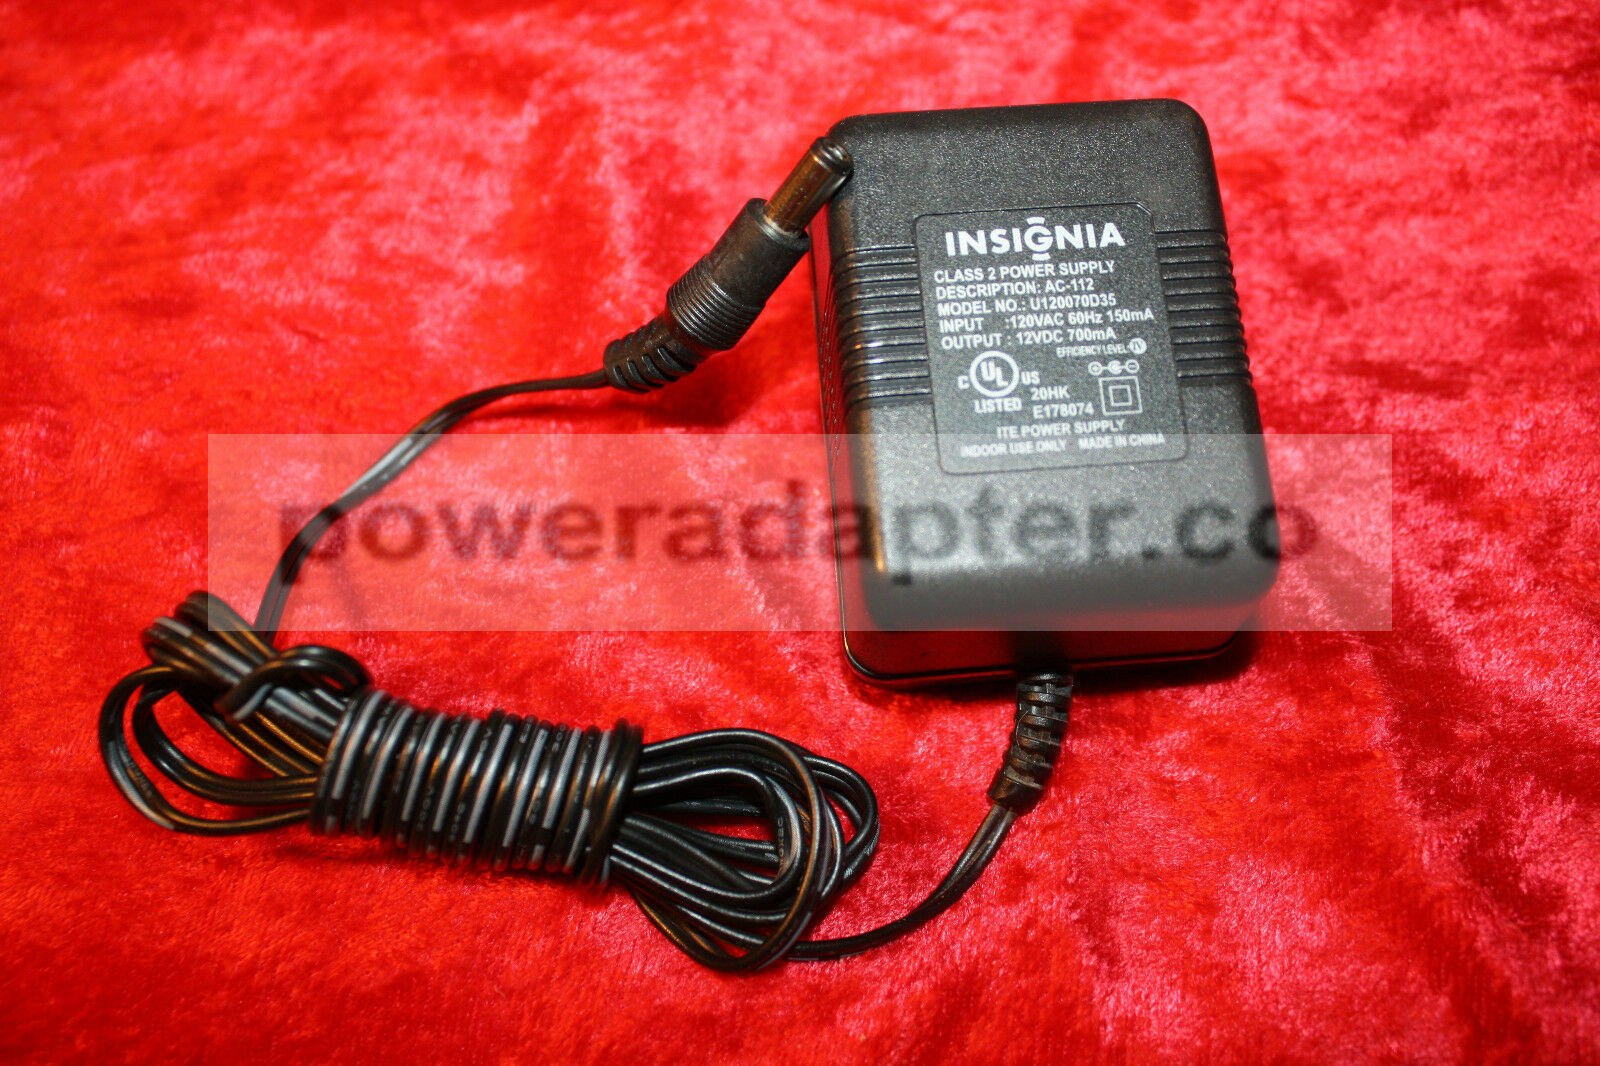 Insignia AC-112 U120070D35 AC Adapter 12 Volt Power Supply Wall Charger Condition: new Brand: Insignia Output Volta